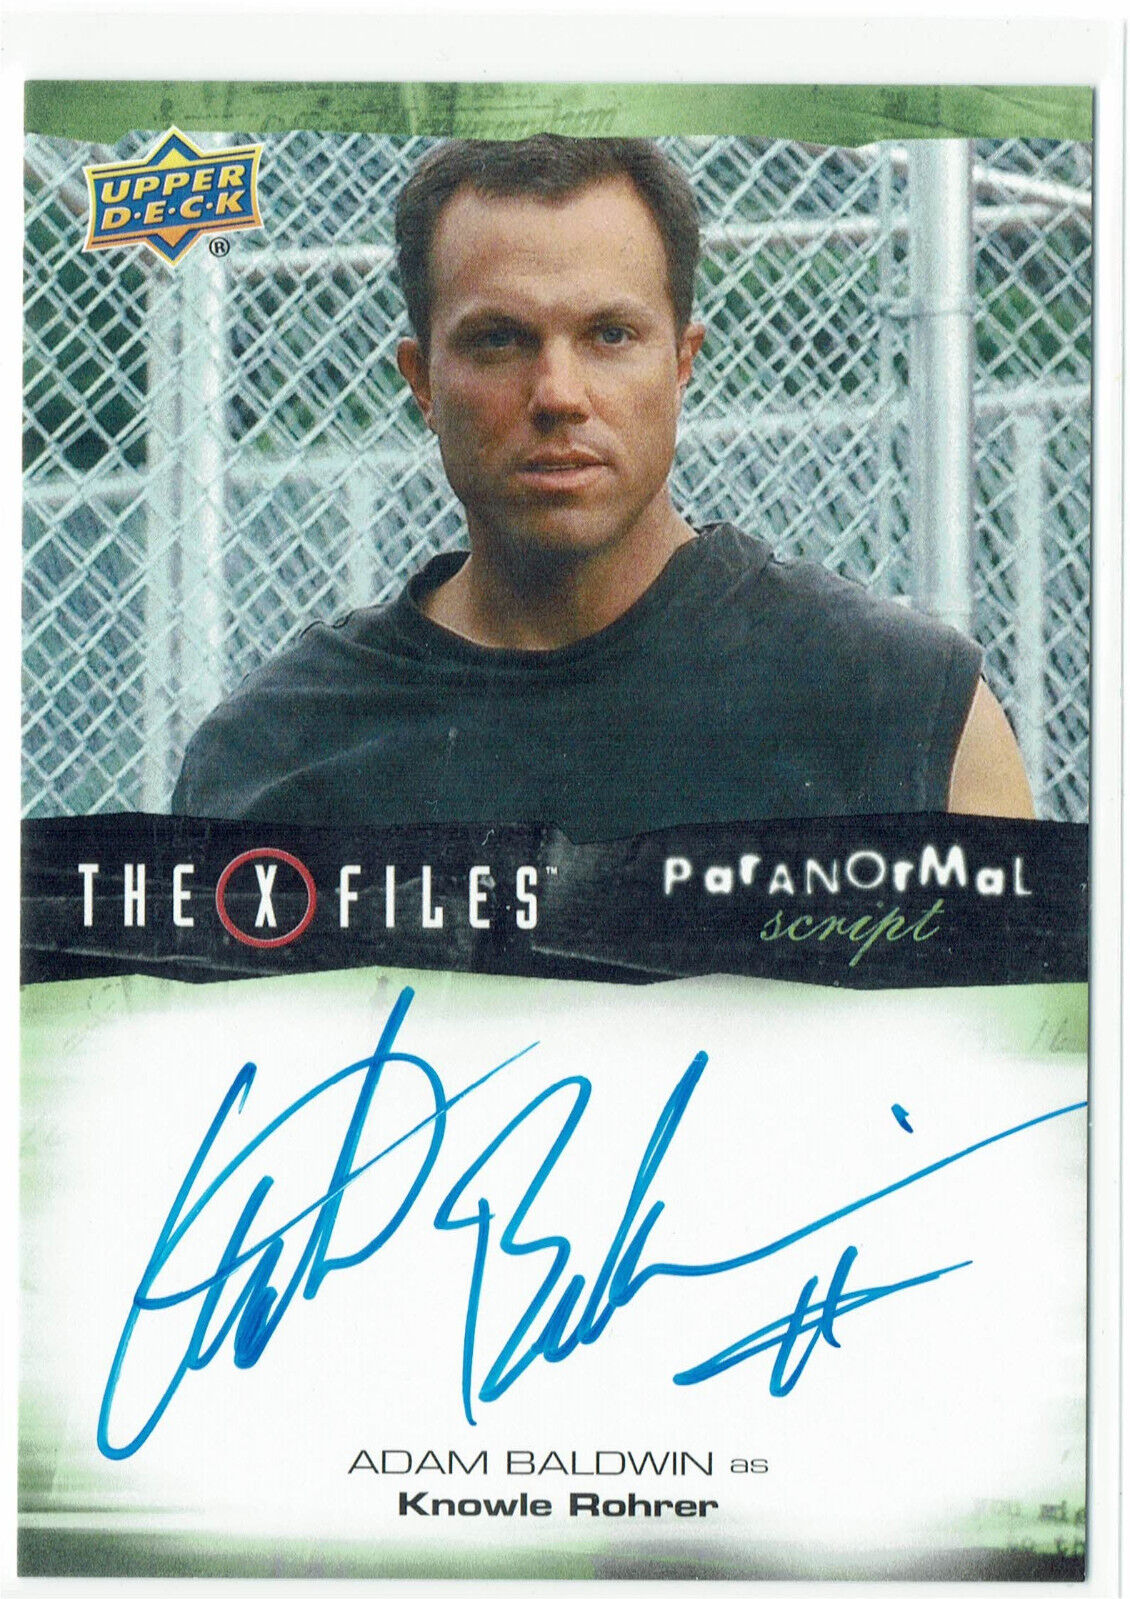 X Files UFOs & Aliens Upper Deck 2019 Auto Autograph Sketch Chase Card Selection